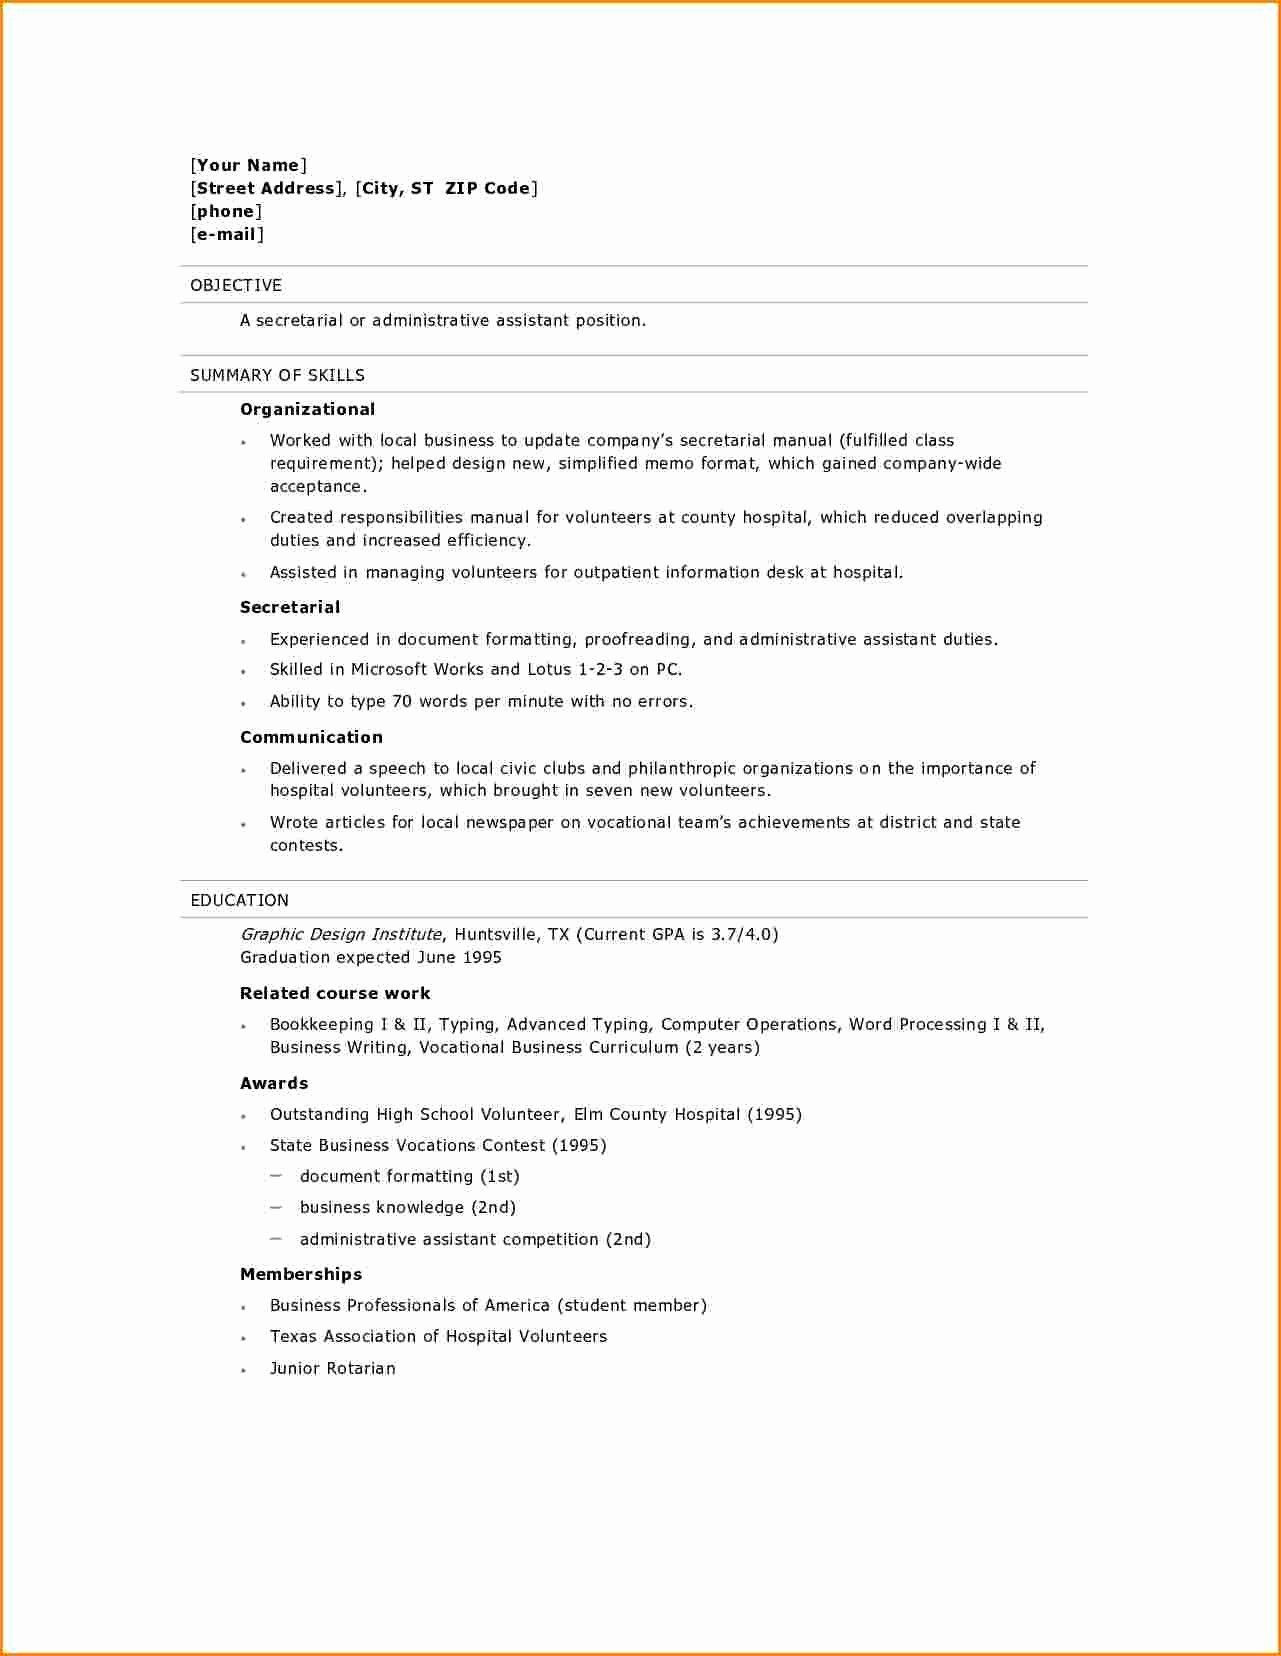 Sample Resumes for Students Graduating Hiogh School Resume format High School Graduate – Resume format Resume for …